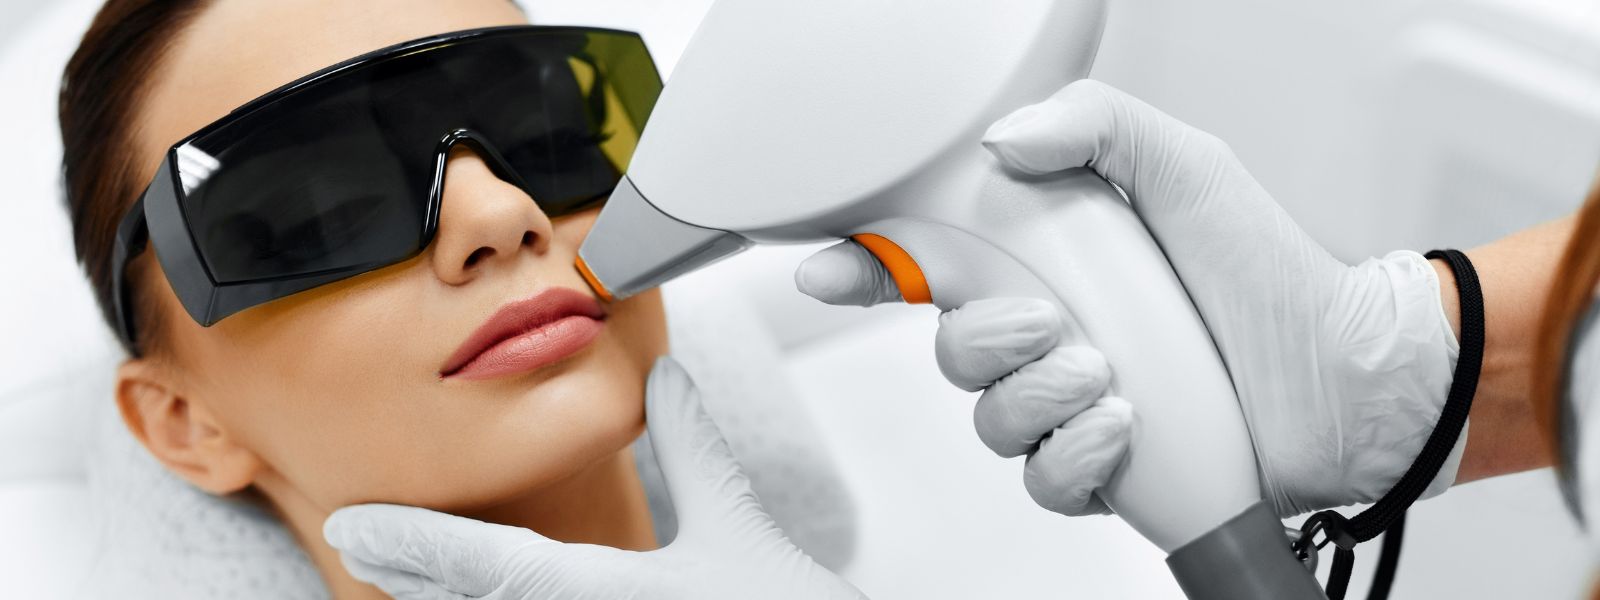 Removing facial hair by laser